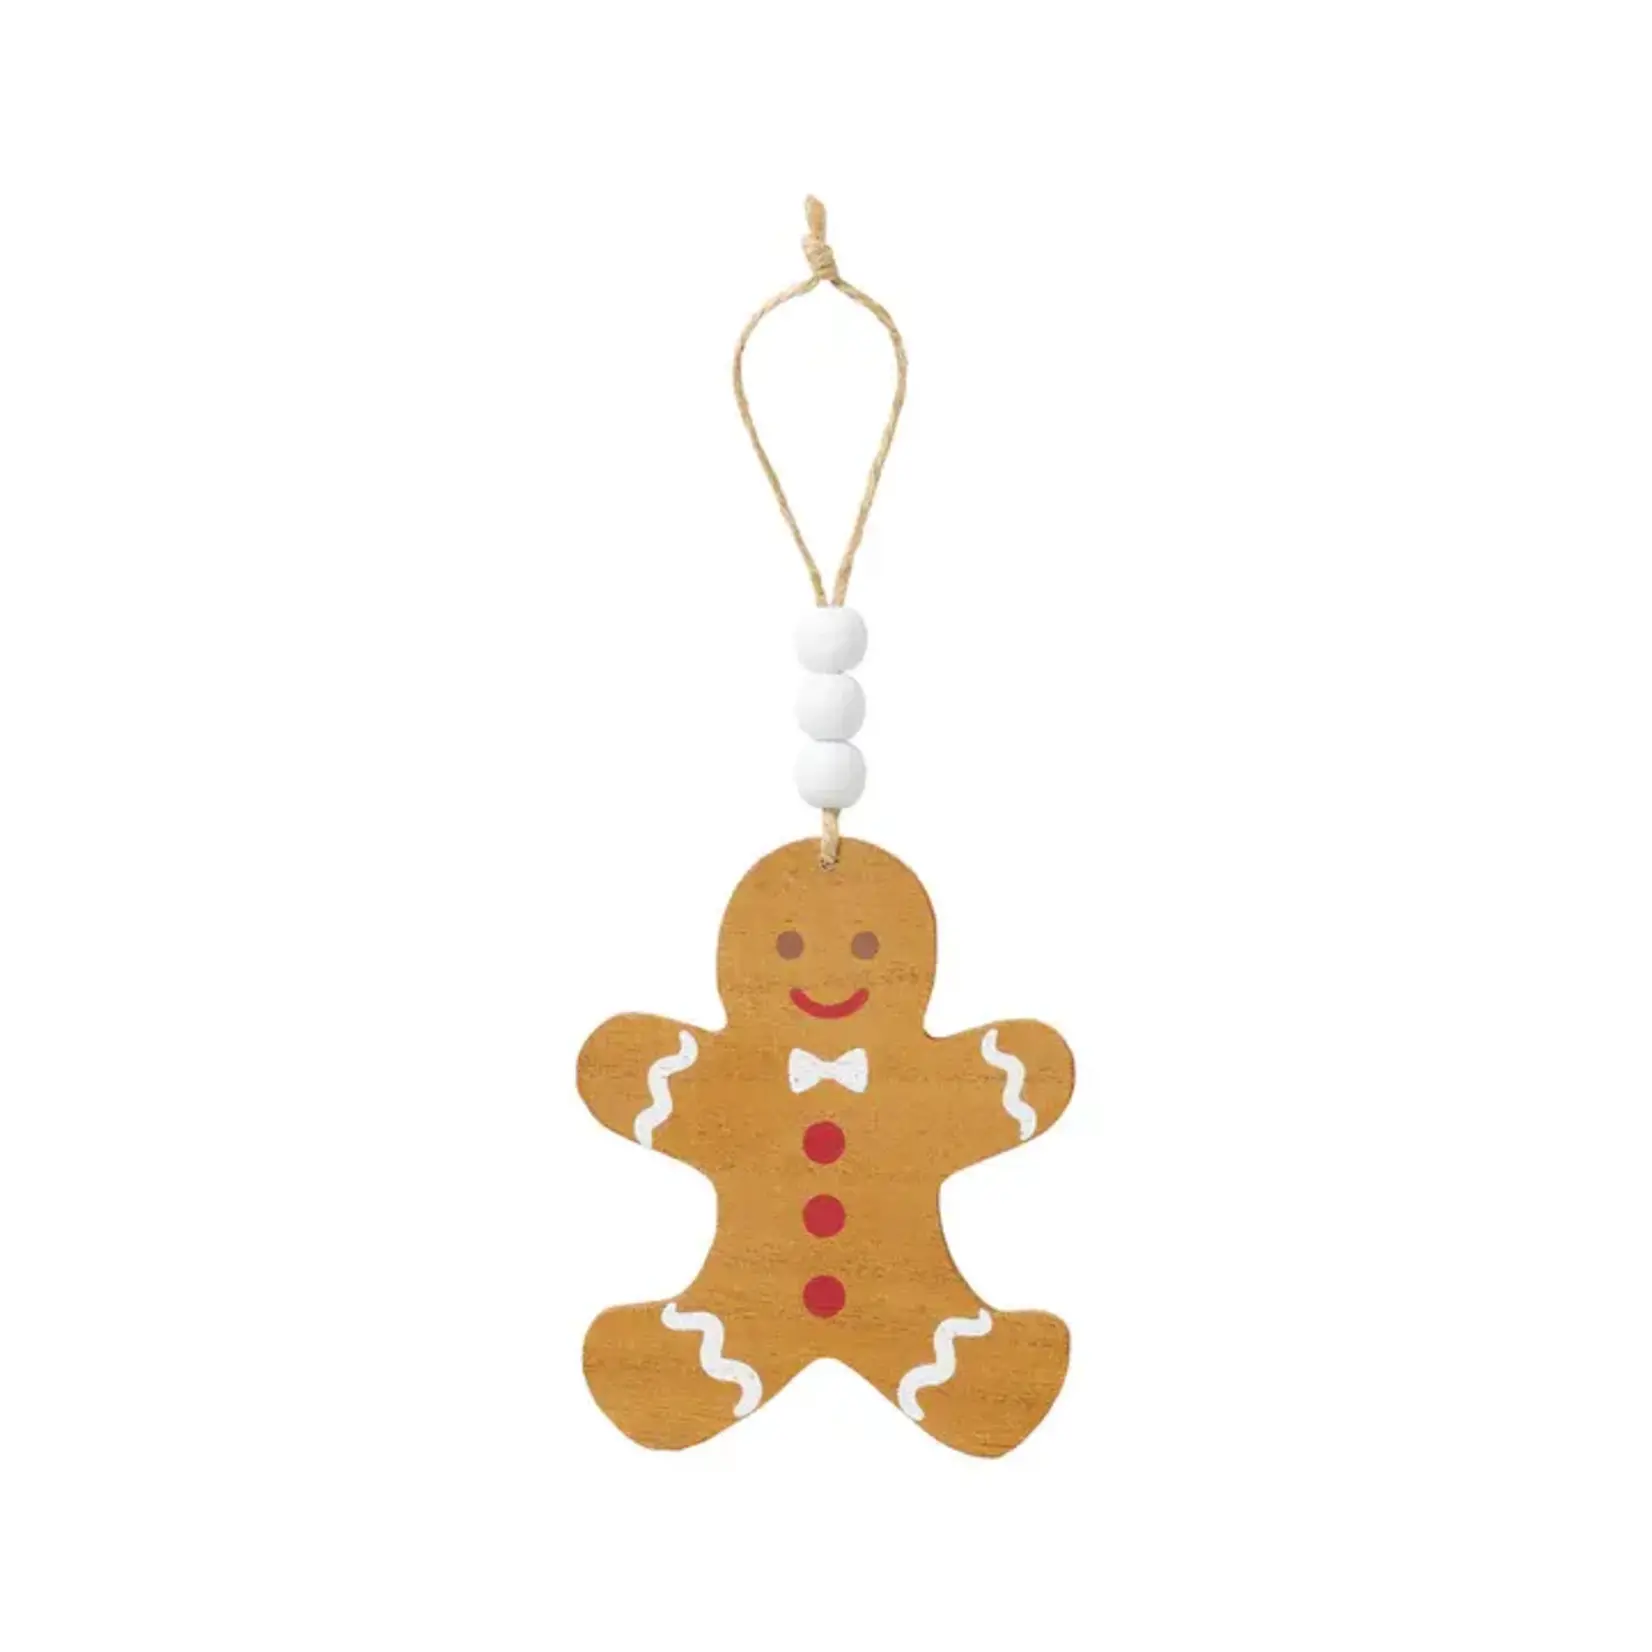 Gingerbread With Bow Tie Ornament, 4"